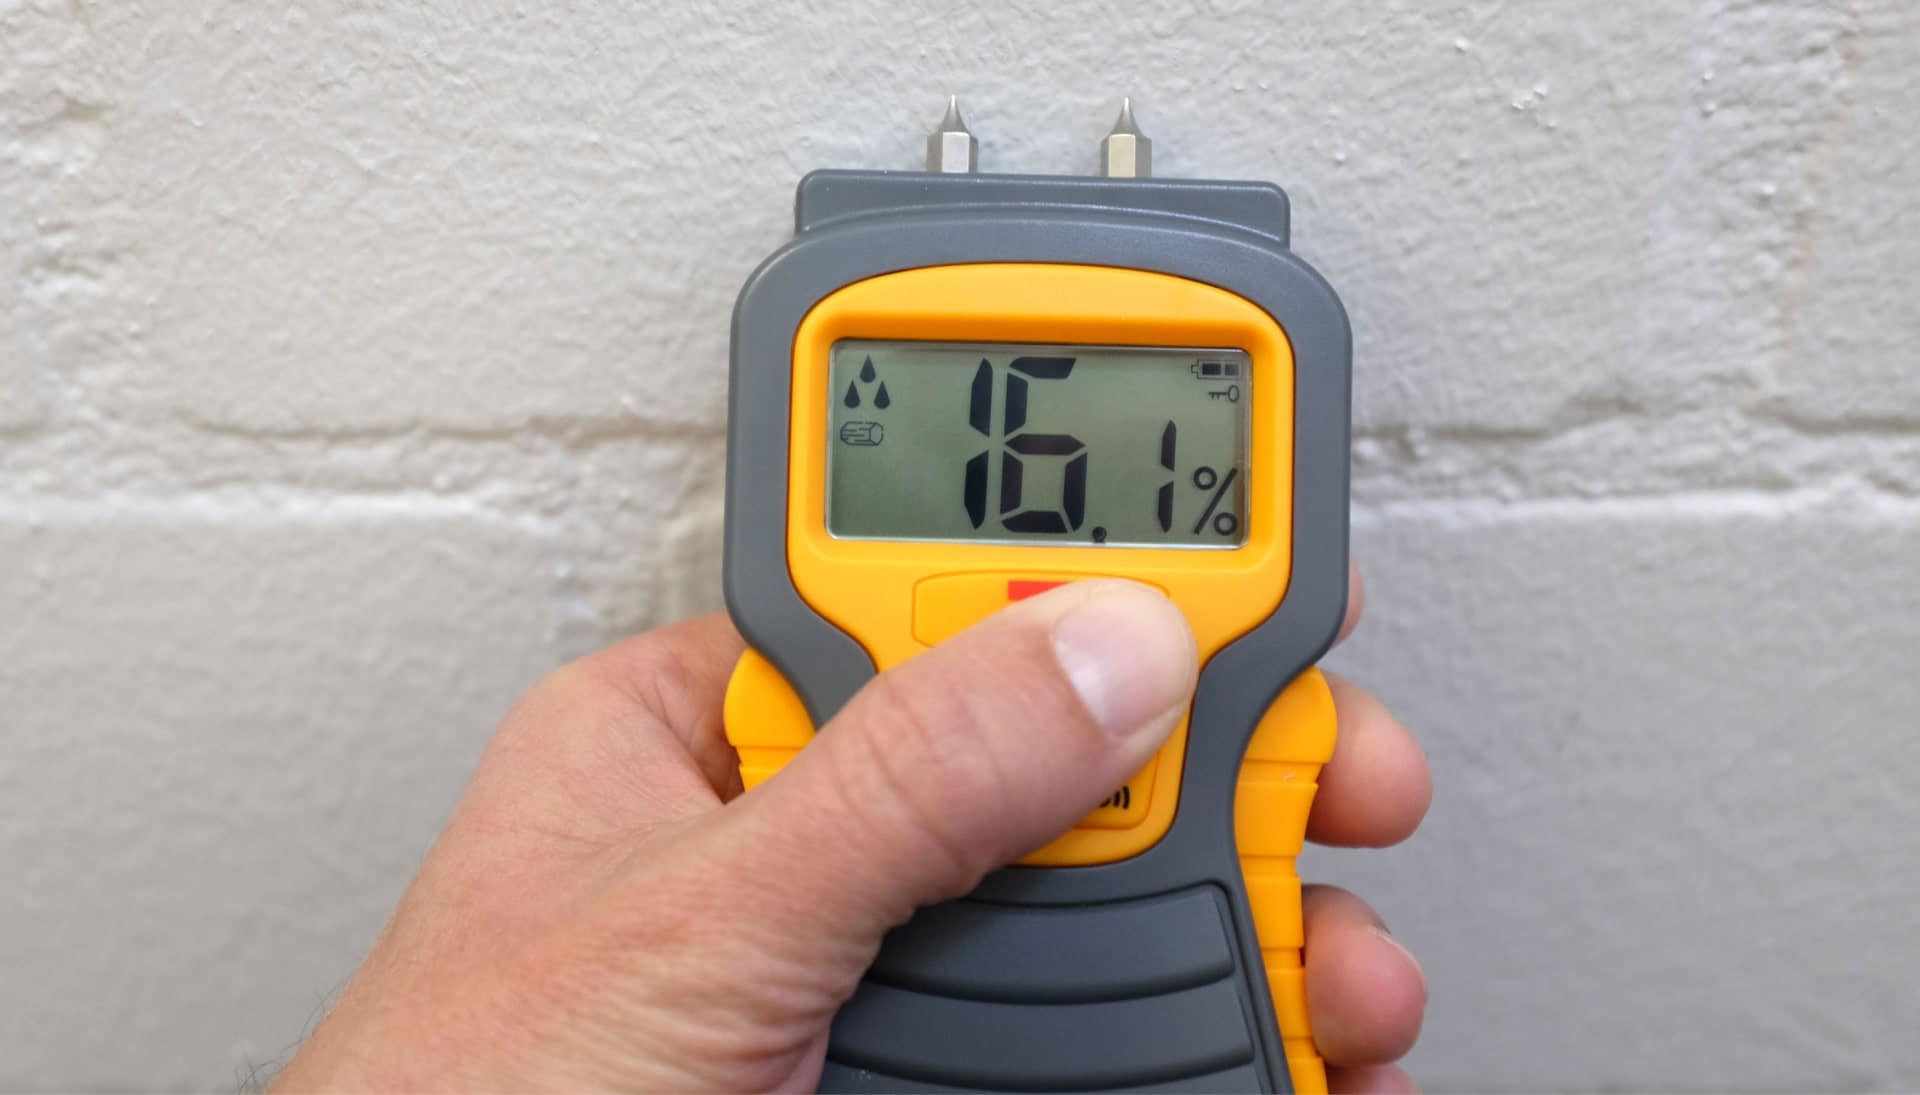 We provide fast, accurate, and affordable mold testing services in Murfreesboro, Tennessee.